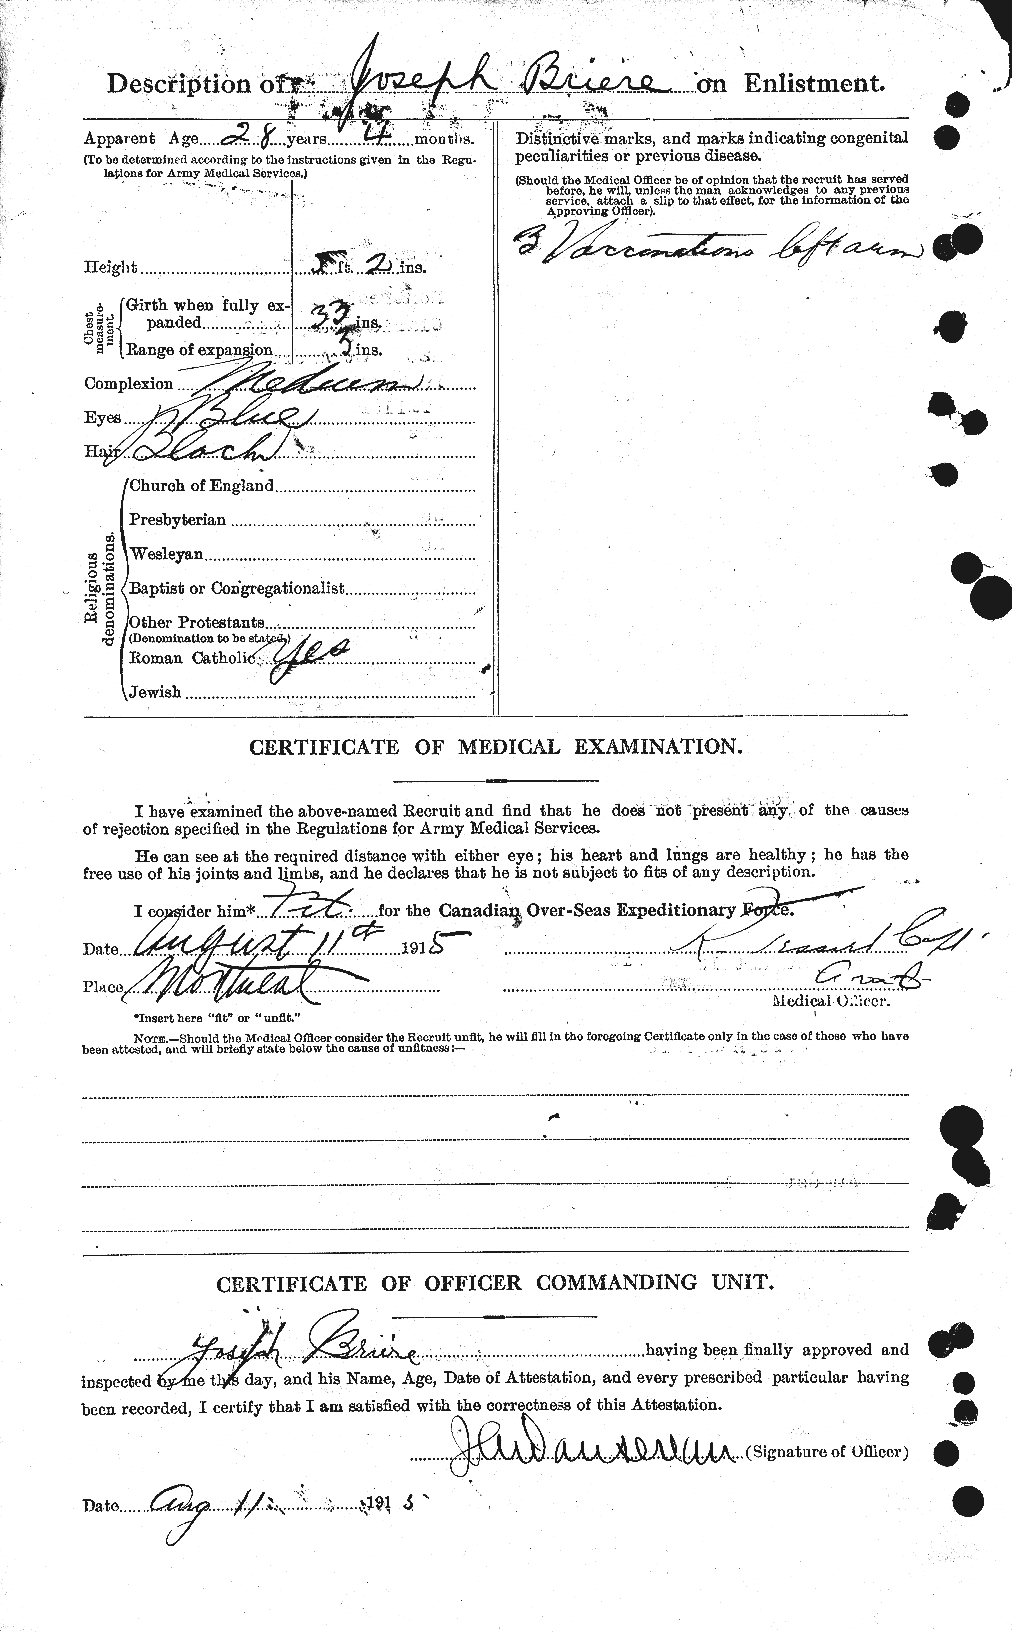 Personnel Records of the First World War - CEF 259979b